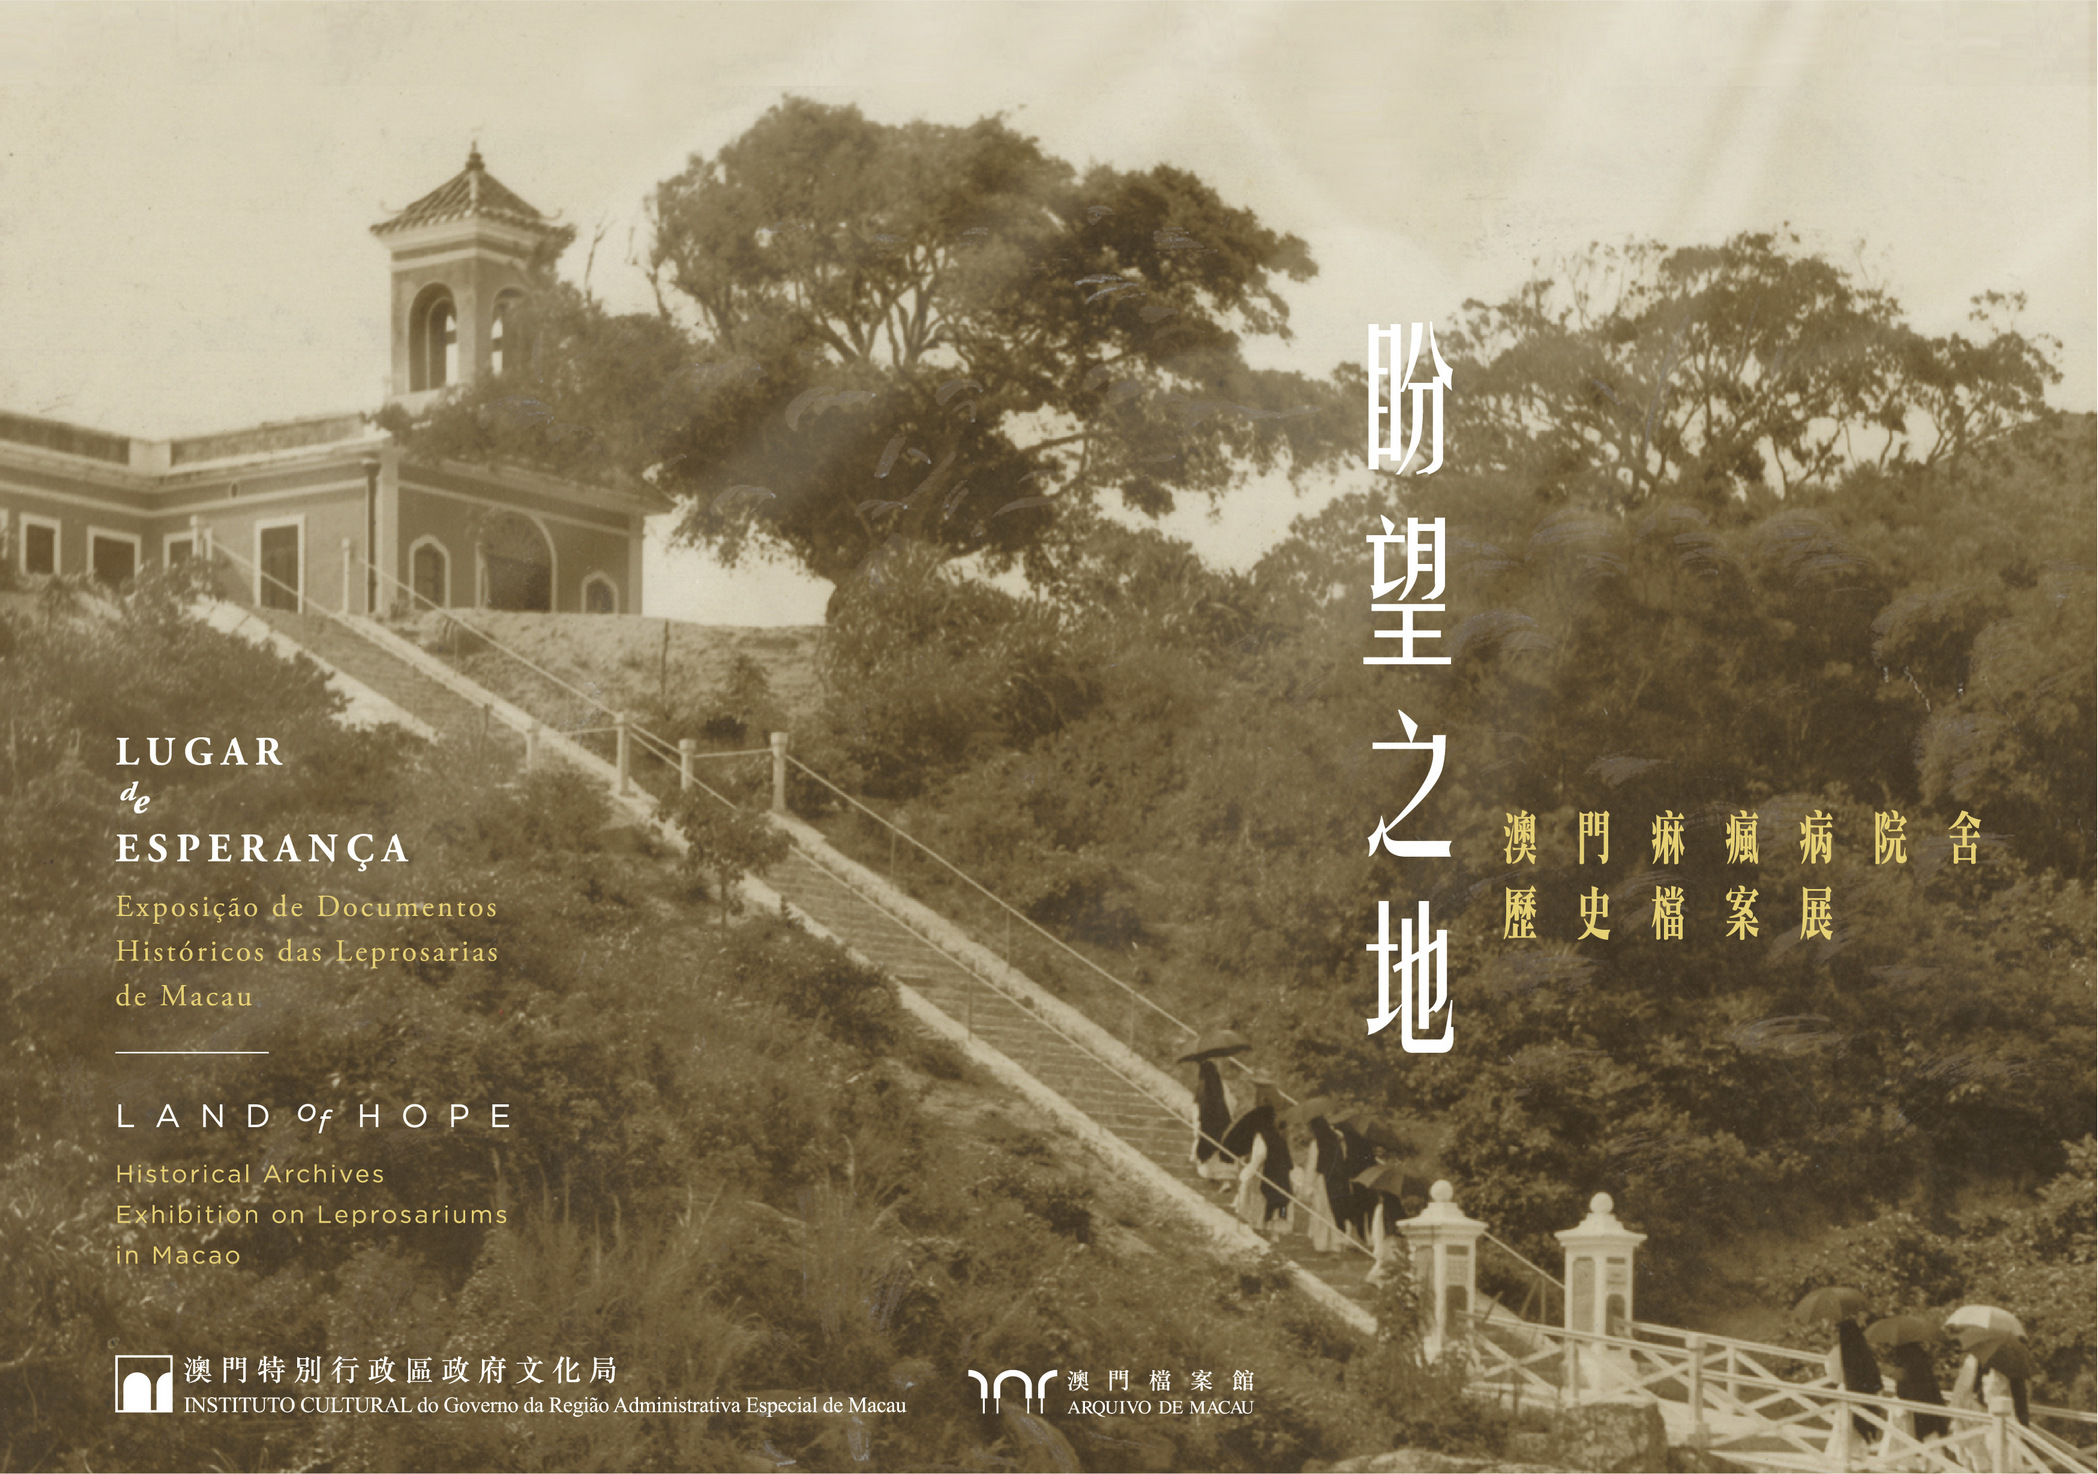 Village of Our Lady in Ka Ho Exhibition Poster